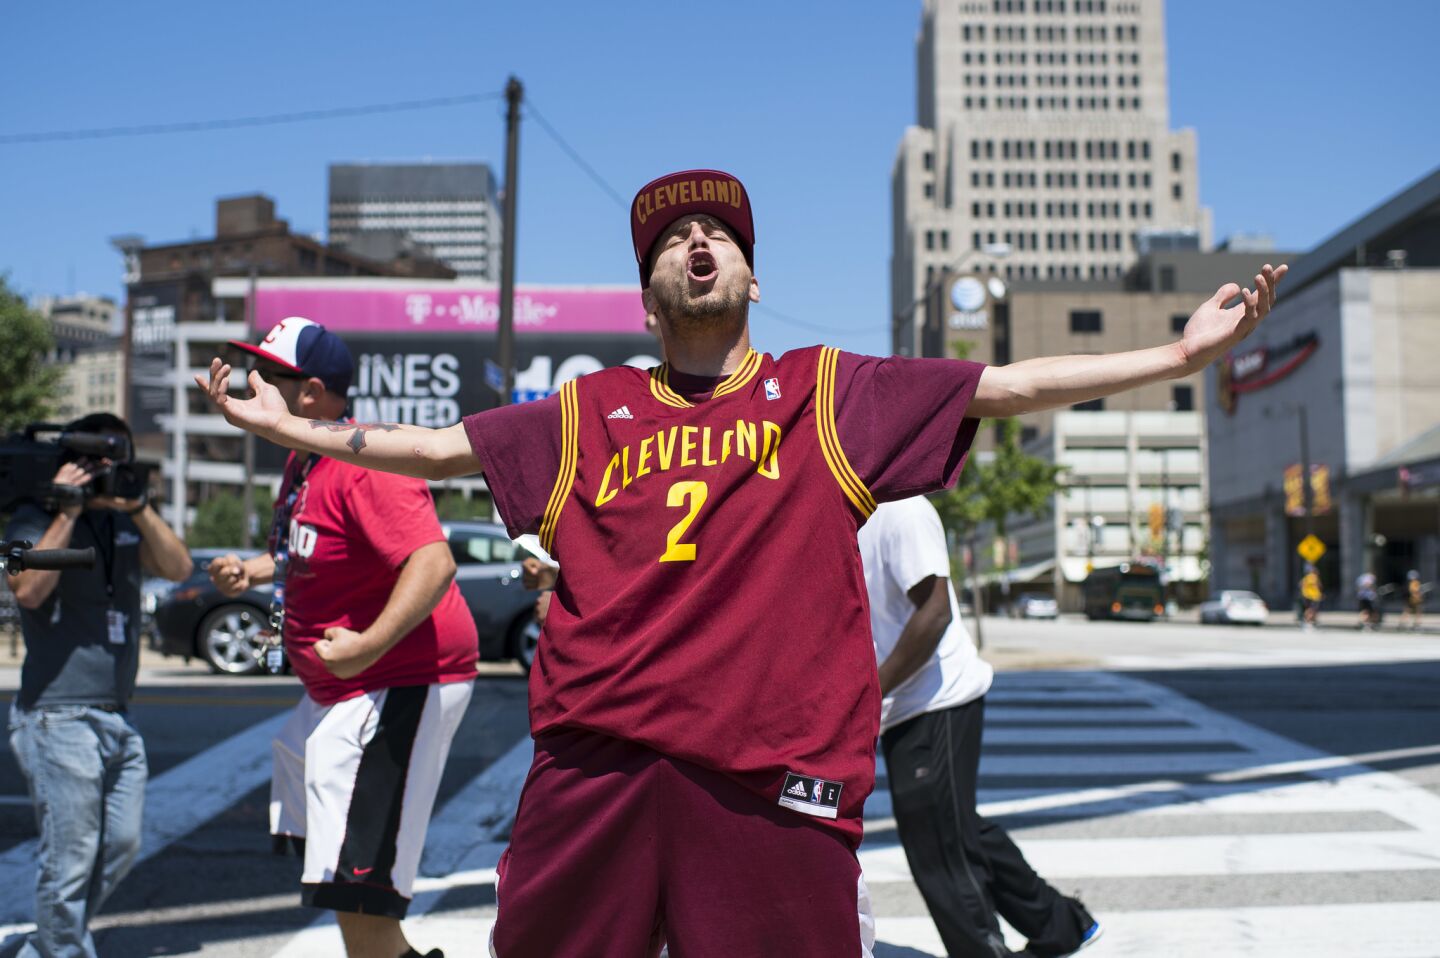 Return to Cleveland: A Cleveland Cavaliers fan reacts to the news of LeBron James' return to Cleveland on July 11, 2014, in Cleveland.